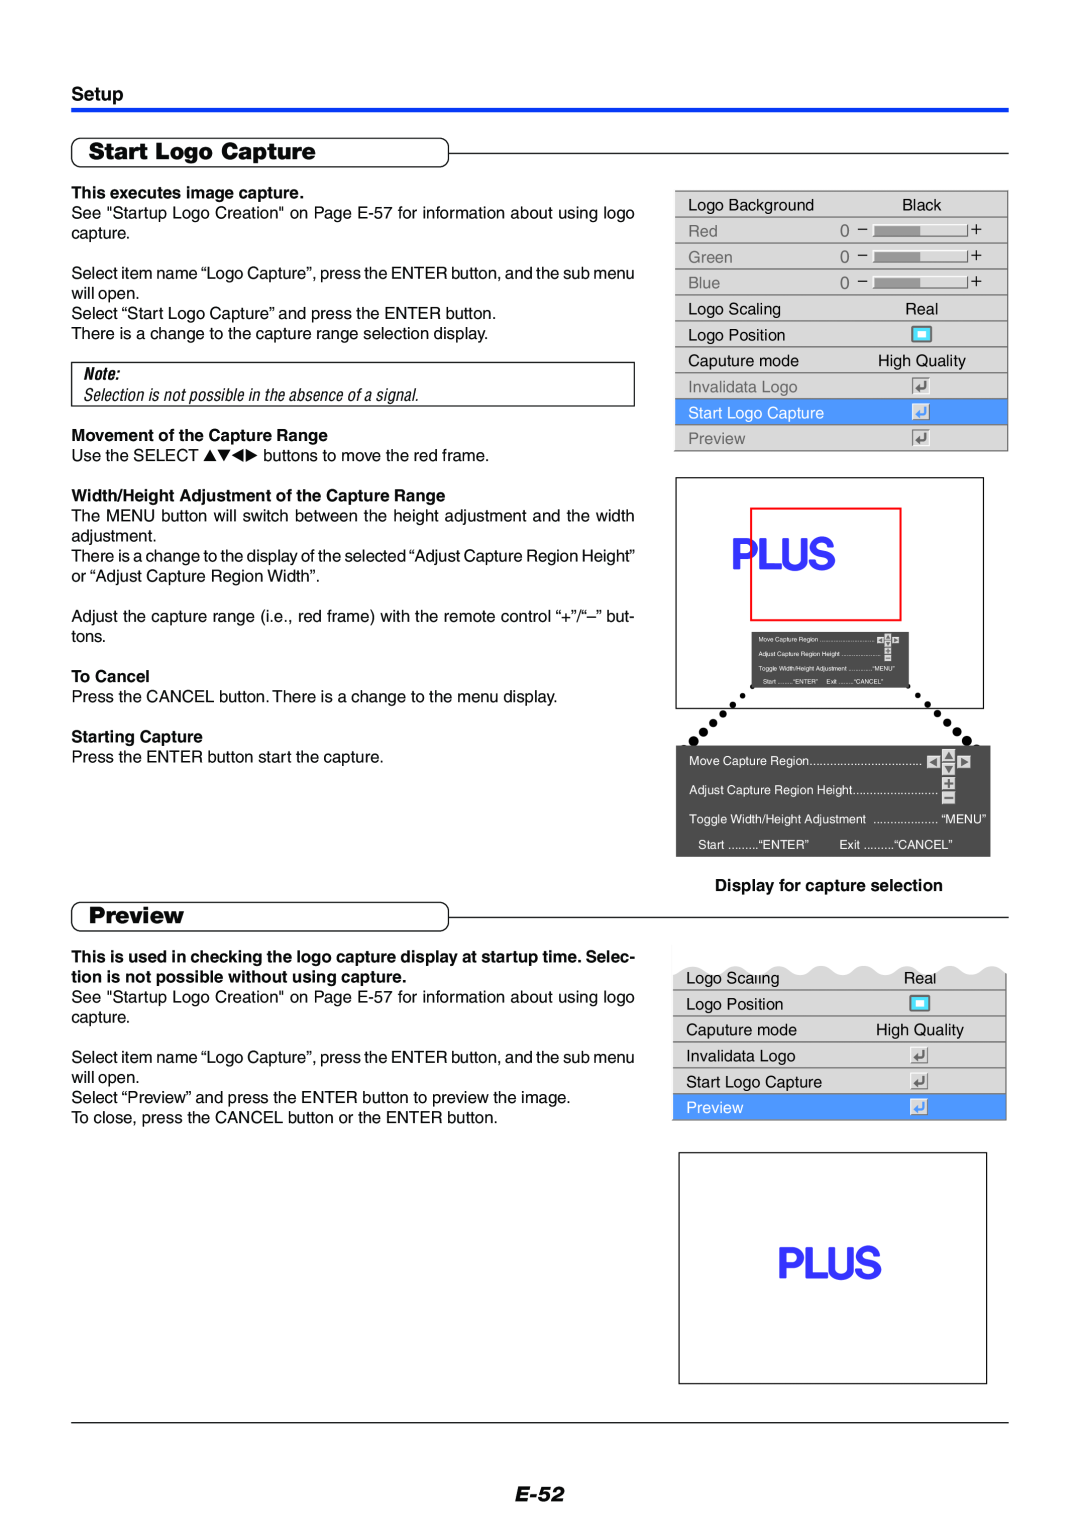 PLUS Vision Data Projector user manual Start Logo Capture, Preview, E-52, Setup, This executes image capture, To Cancel 